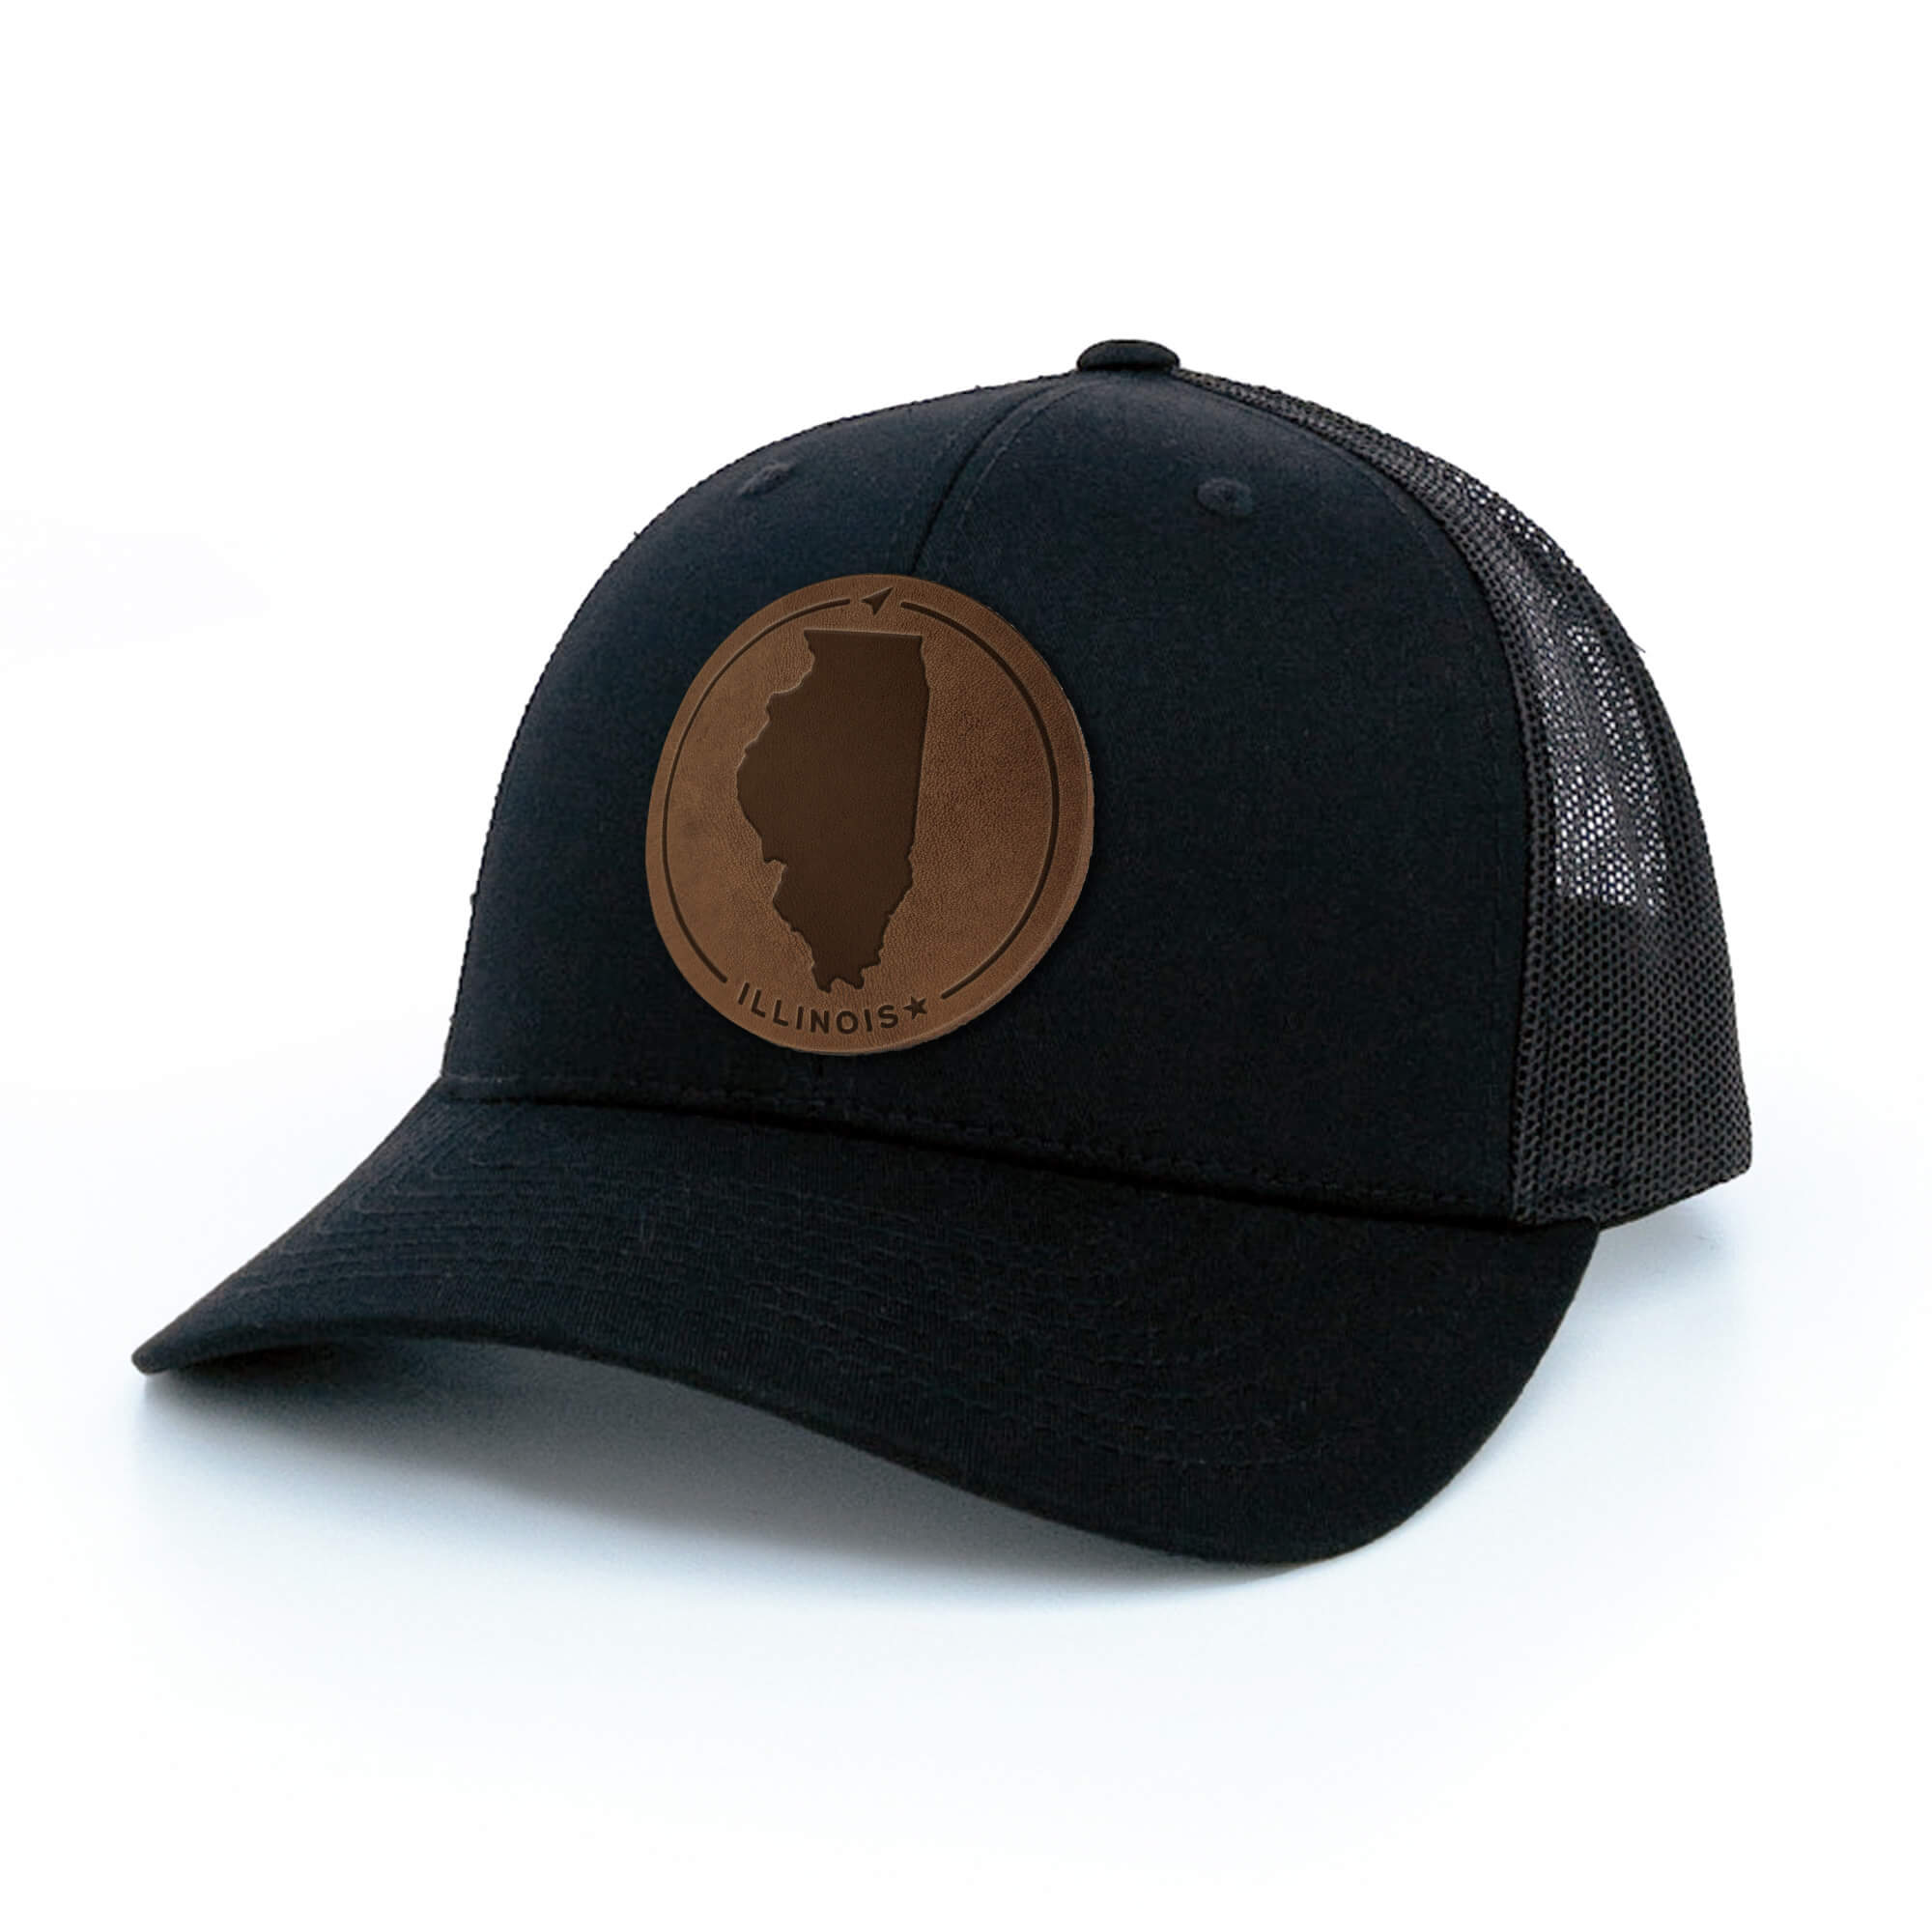 Black trucker hat with full-grain leather patch of Illinois | BLACK-003-008, CHARC-003-008, NAVY-003-008, HGREY-003-008, MOSS-003-008, BROWN-003-008